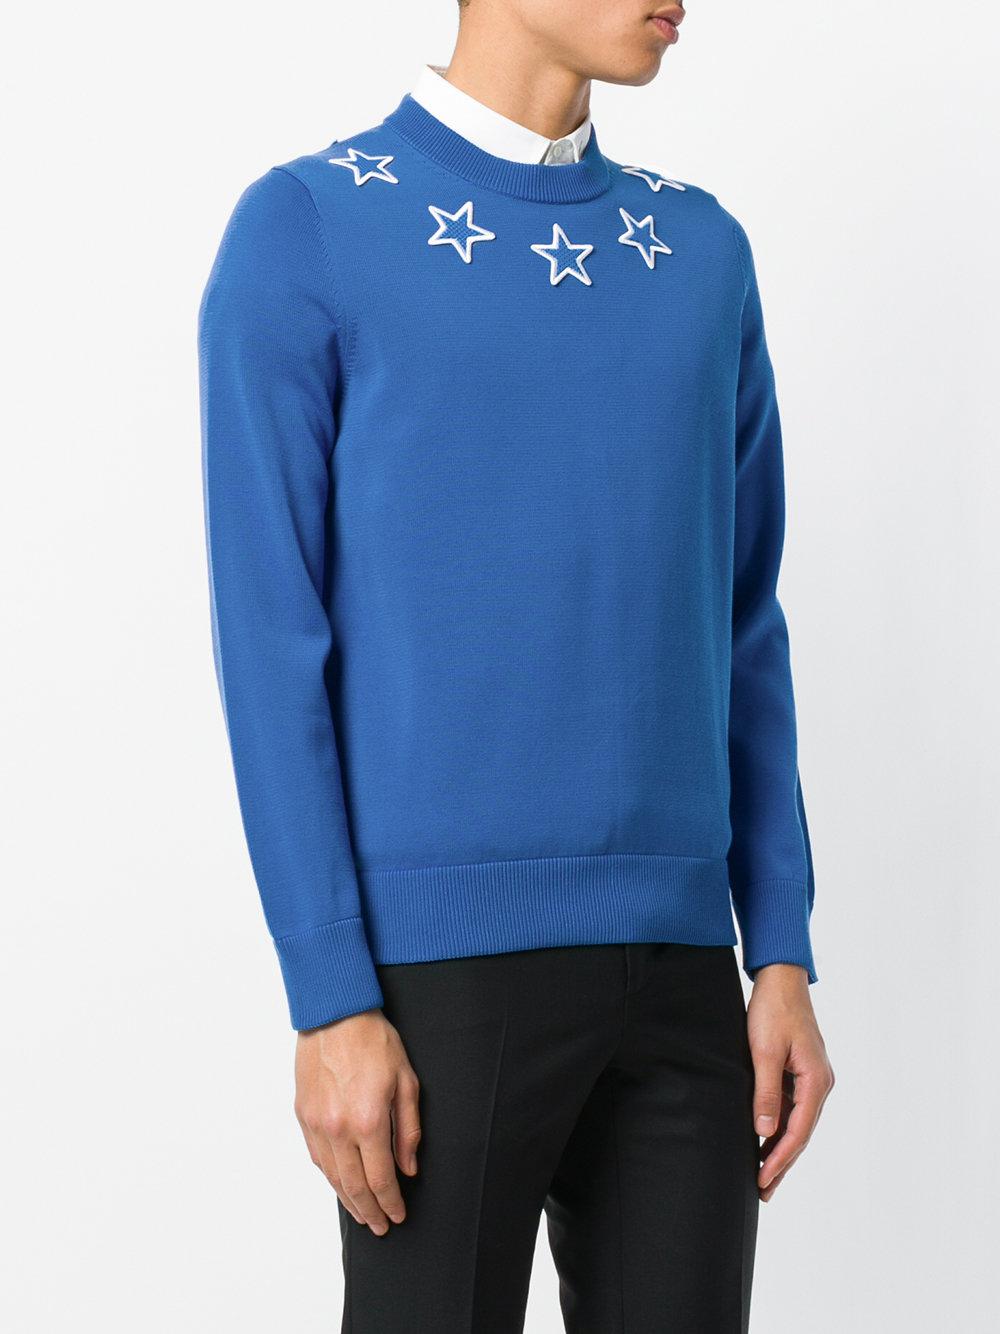 givenchy men's star sweater